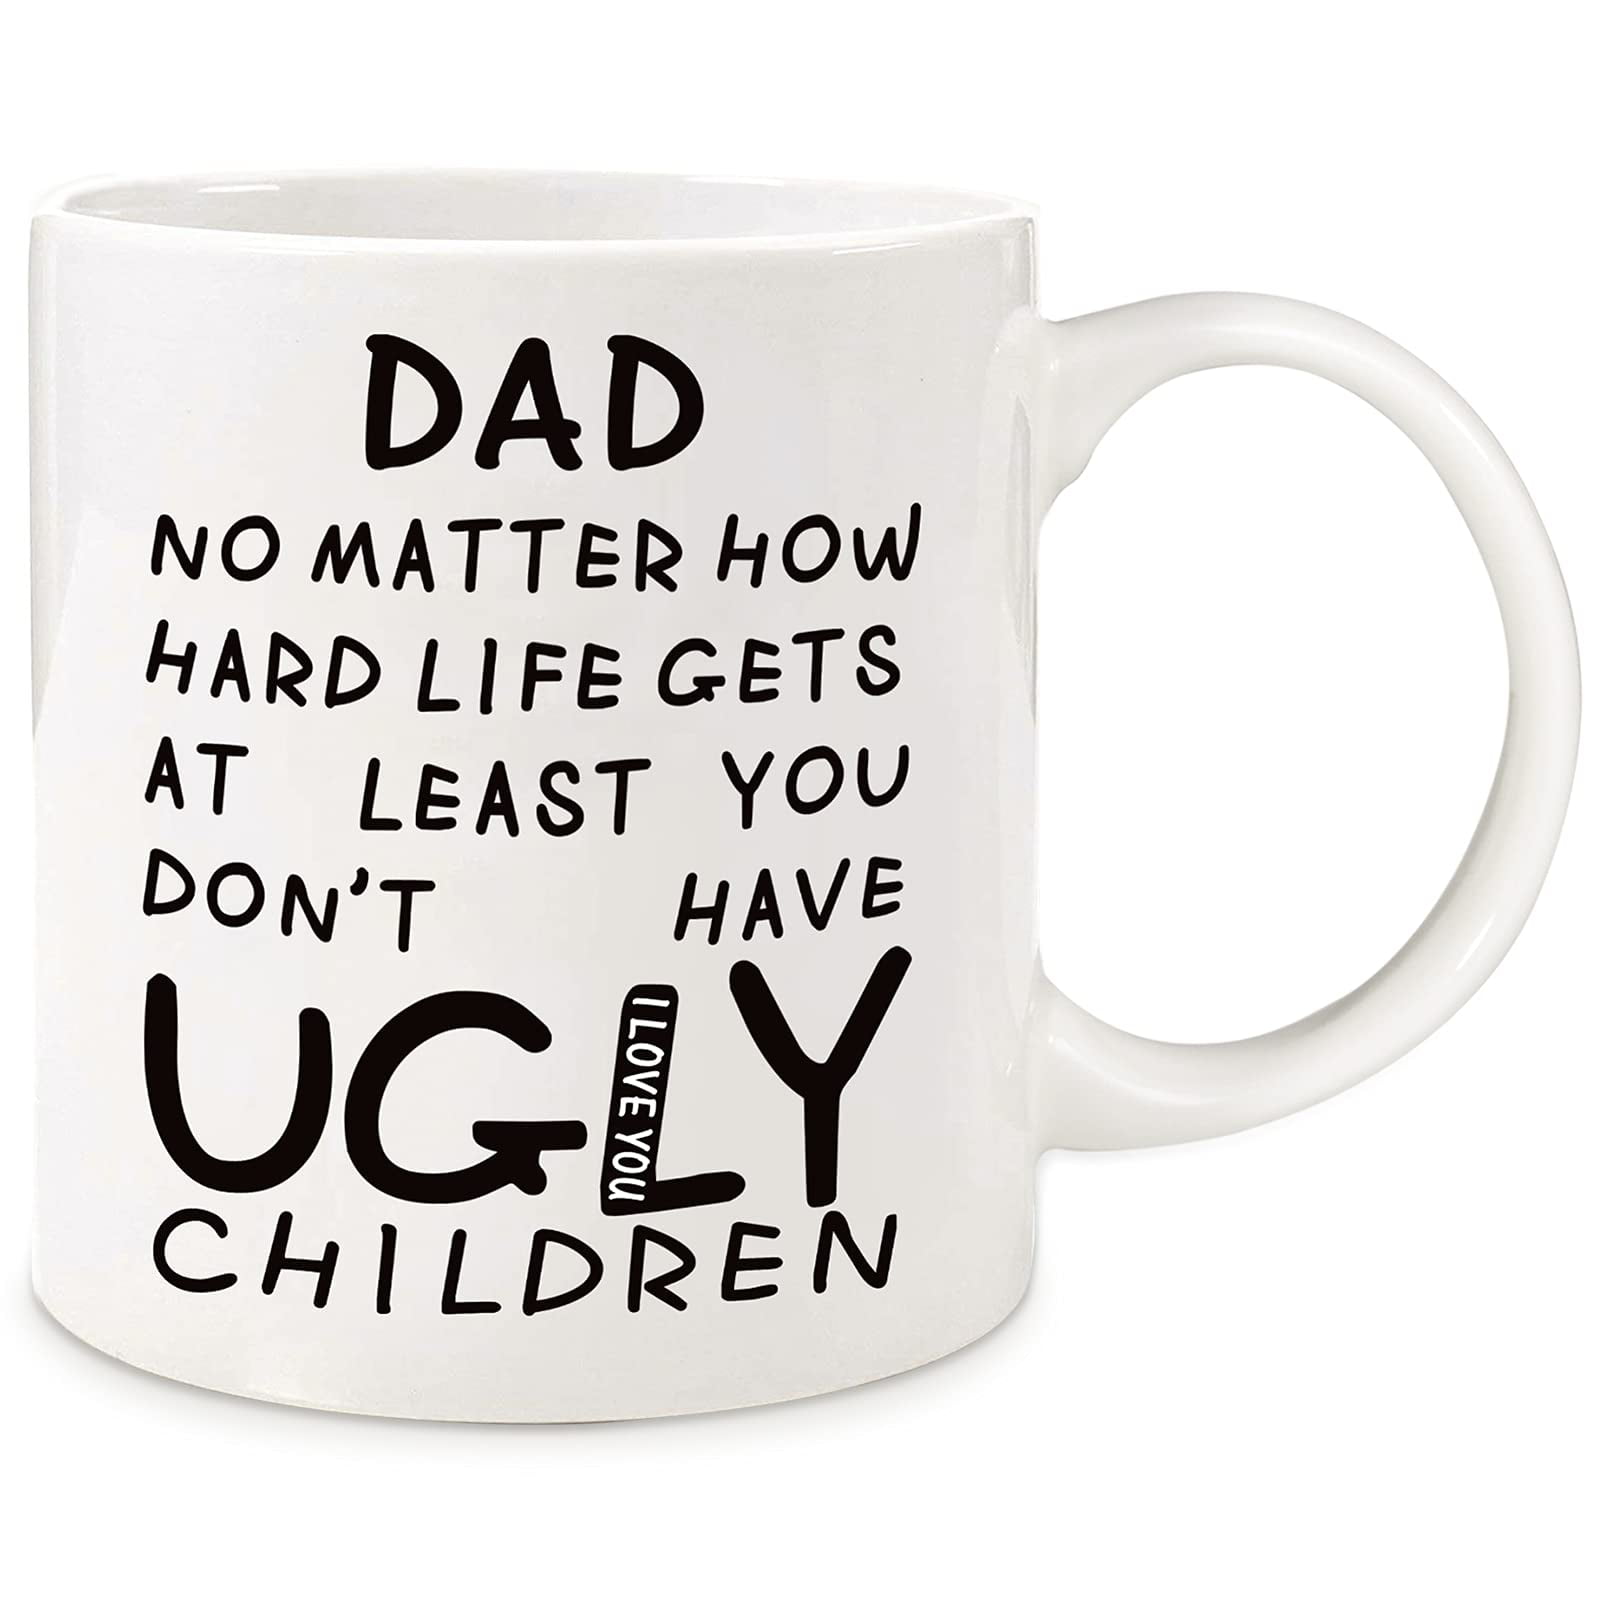 NO.1 Dad in The World Best Father Birthday Gifts for Dad Father Men Husband Ceramic Cup White Funny Fathers Day Dad Coffee Mug 11 Oz 